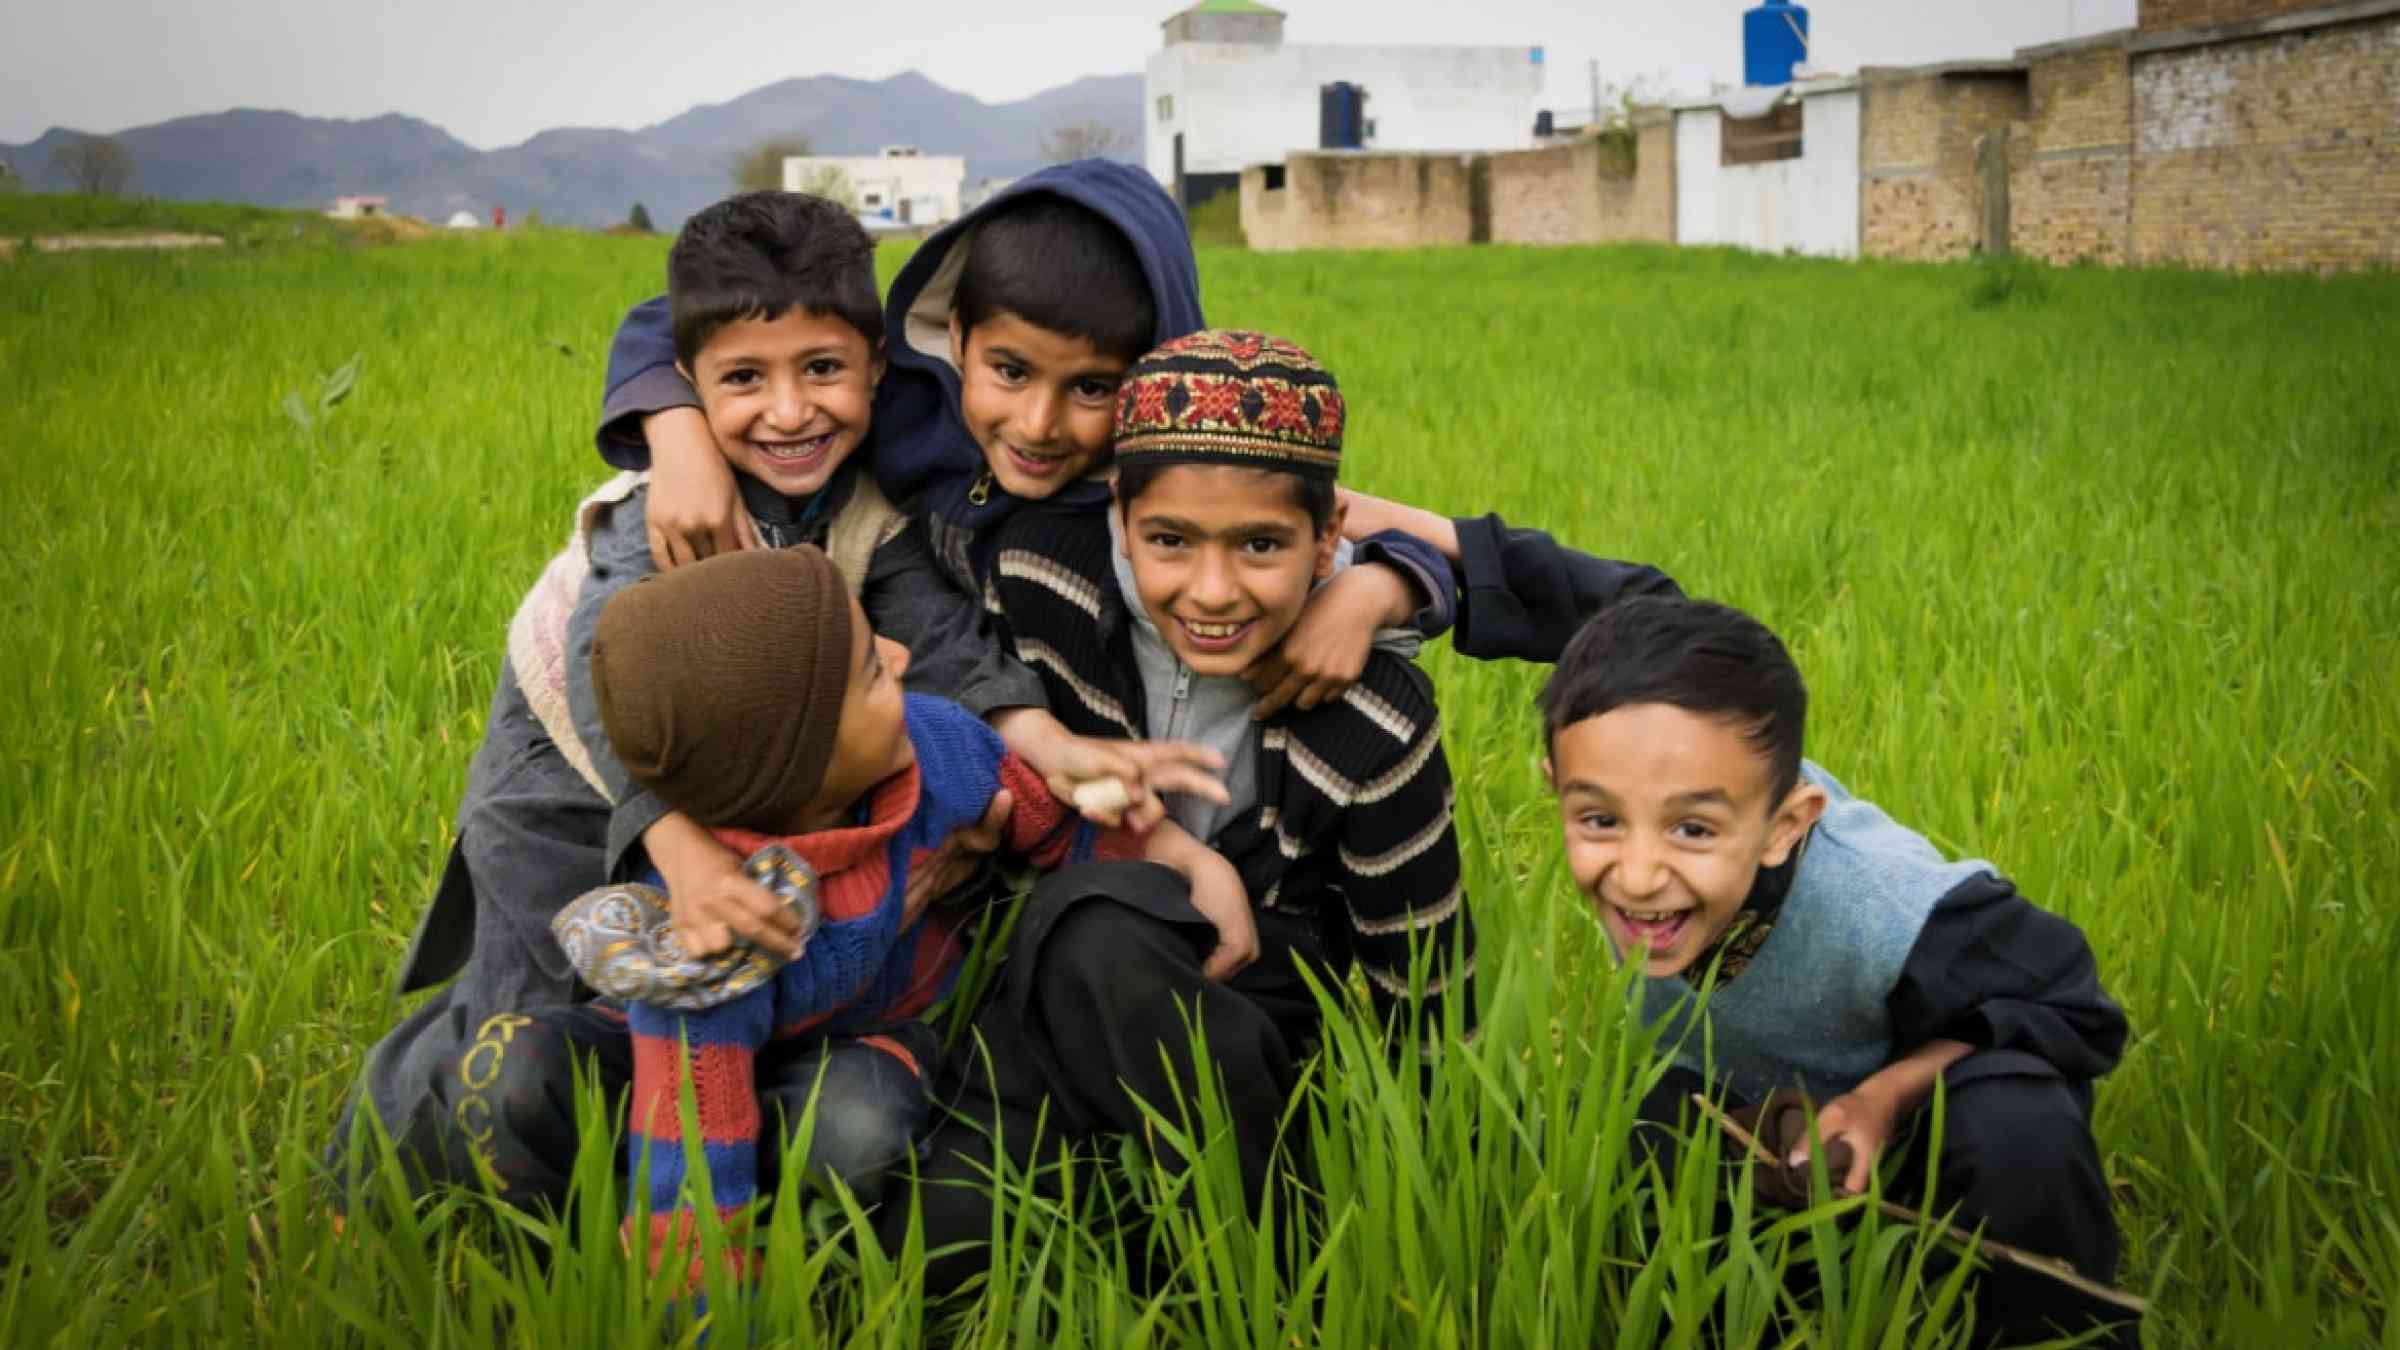 A group of five children from a village in Pakistan playing in the green field.